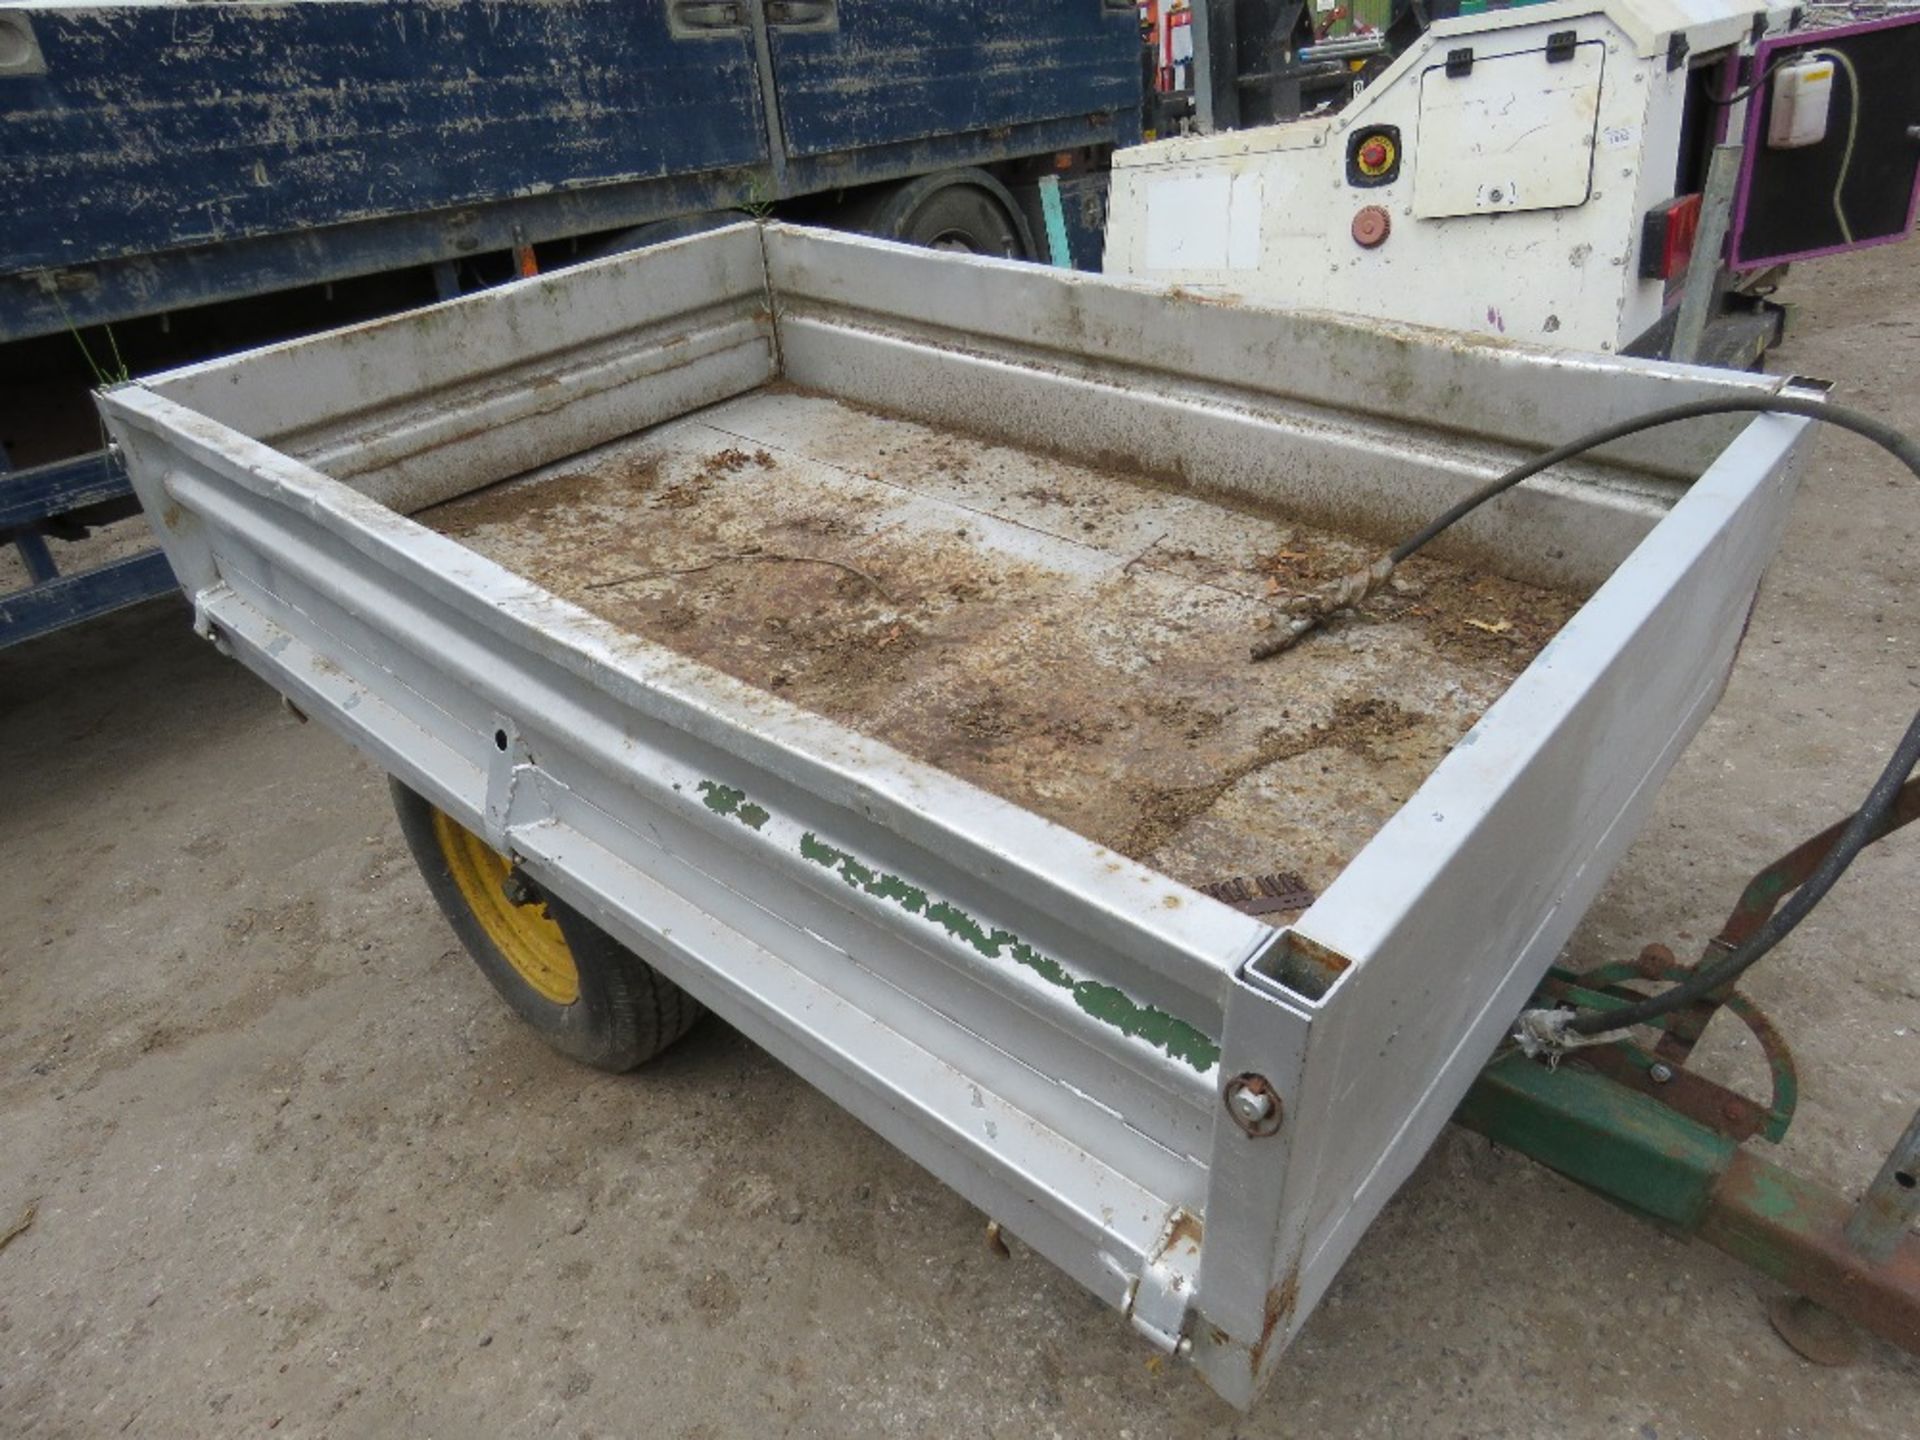 FRASER SMALL SIZED AGRICULTURAL TIPPING TRAILER IDEAL FOR COMPACT TRACTOR - Image 3 of 4